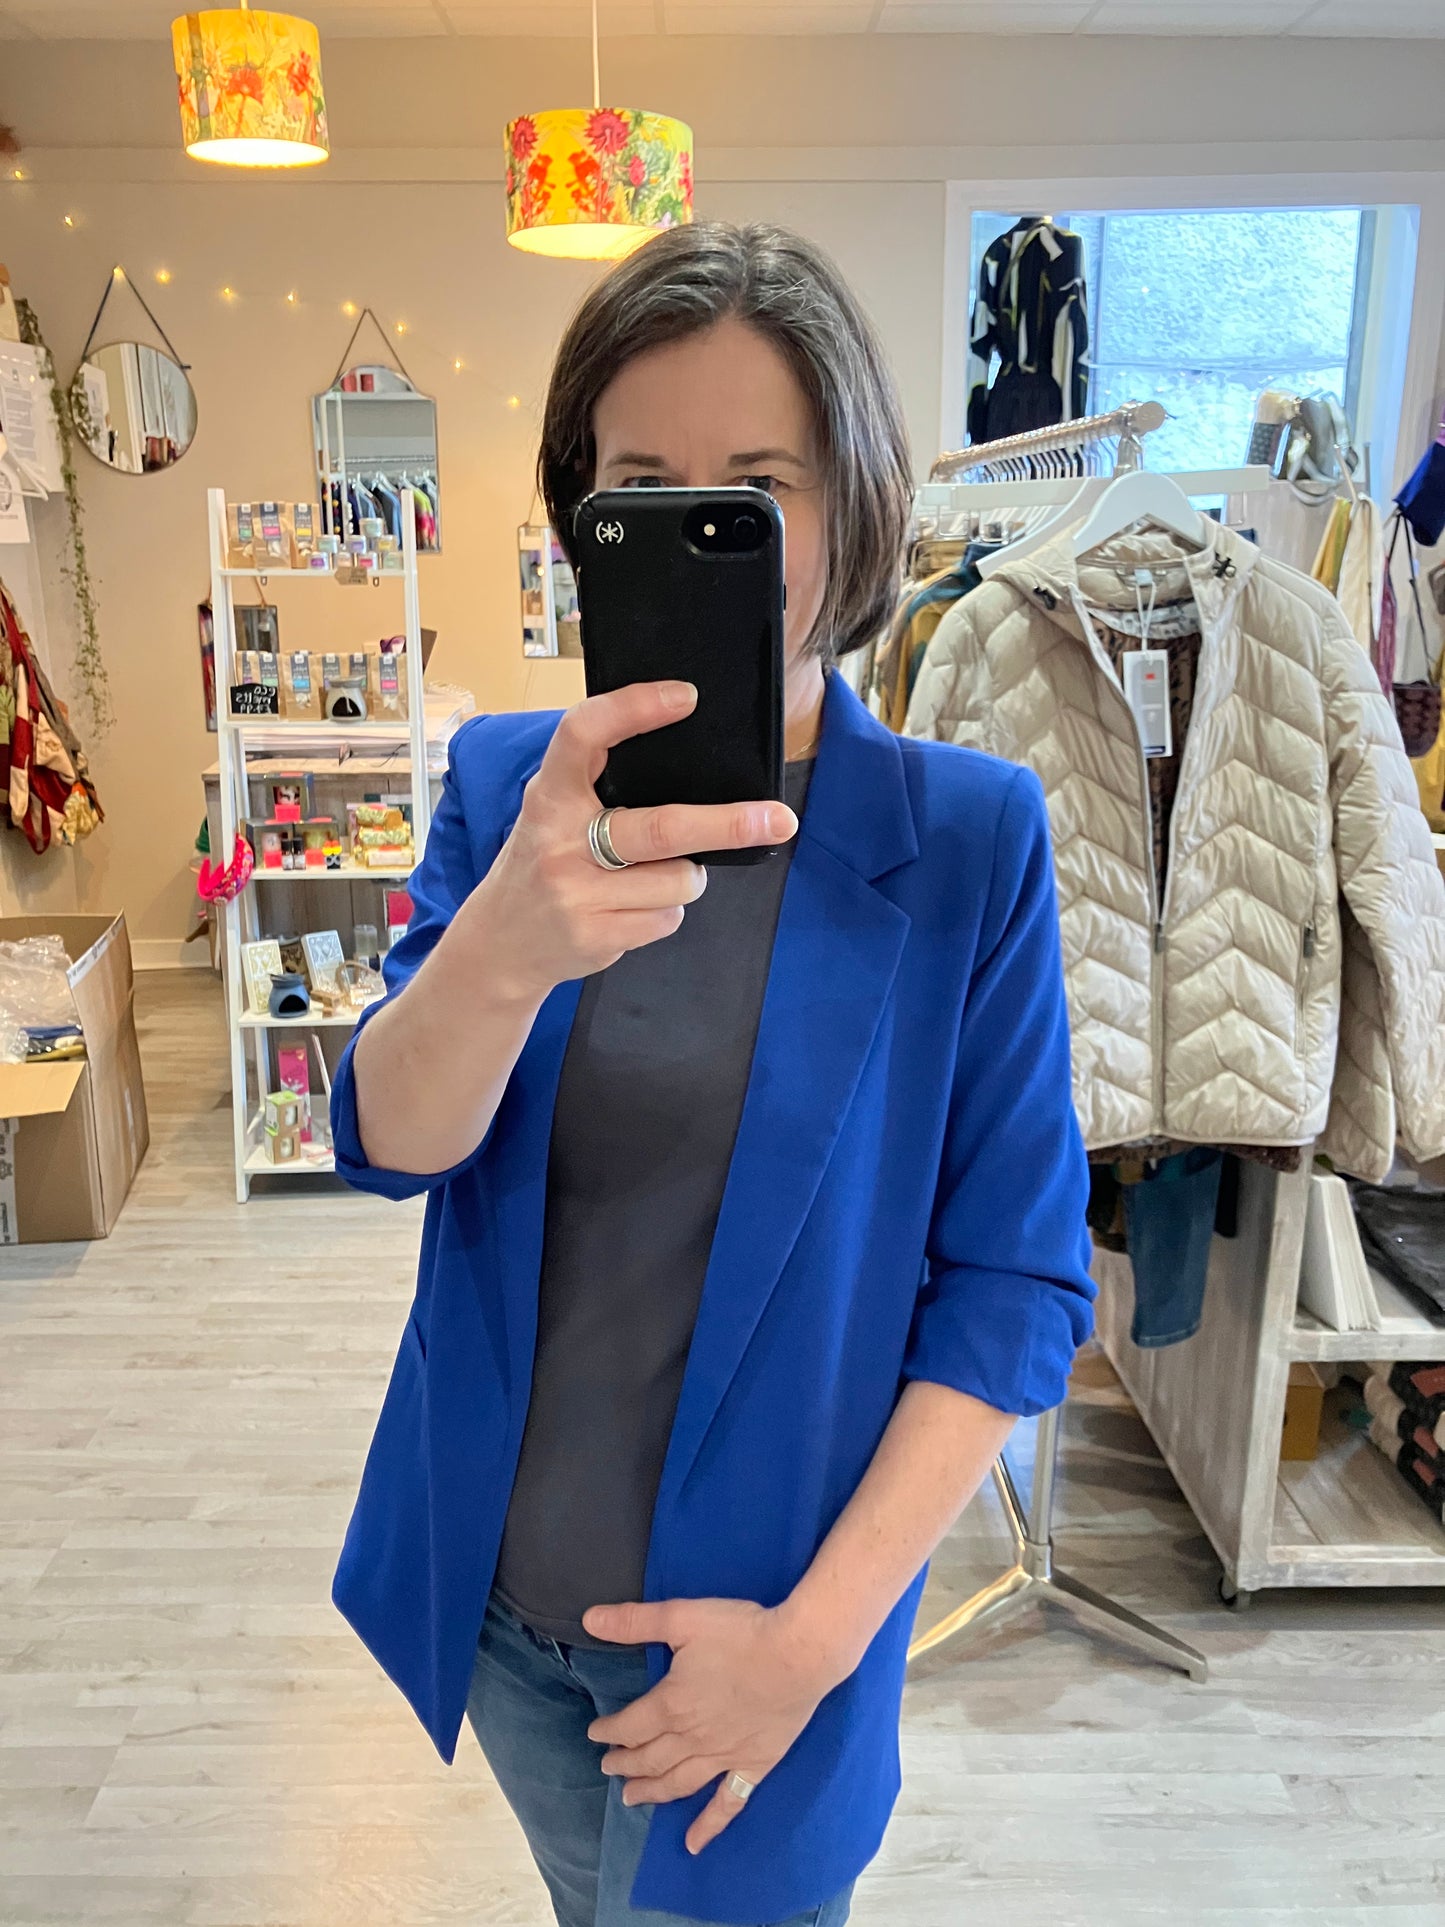 Soaked Shirley blazer in beaucoup blue